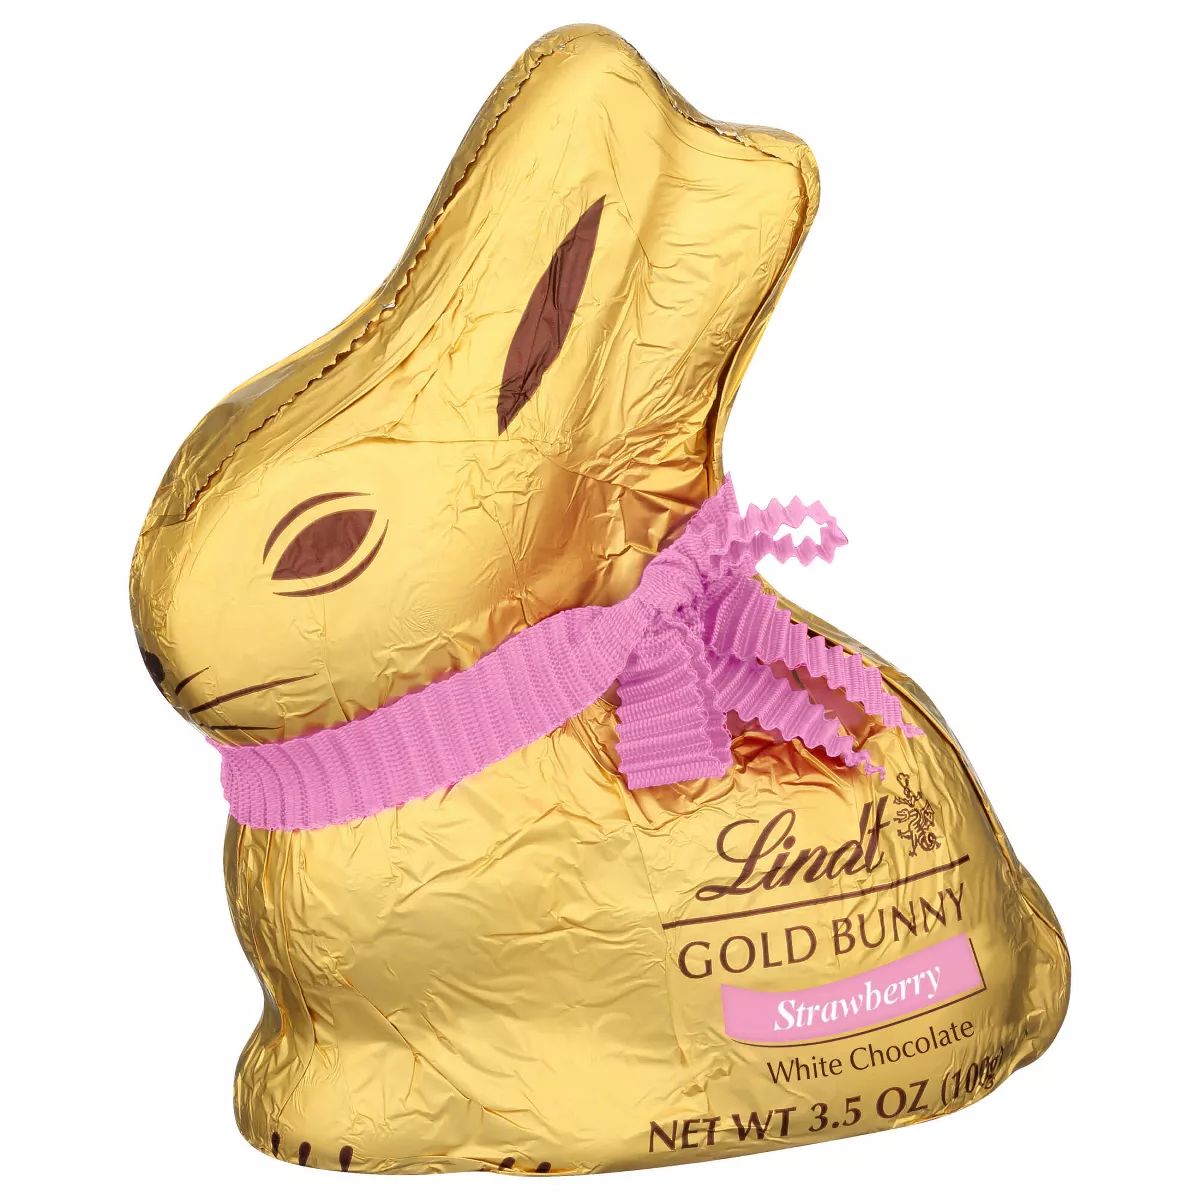 Lindt Easter Gold Bunny Strawberry White Chocolate - 3.5oz | Target